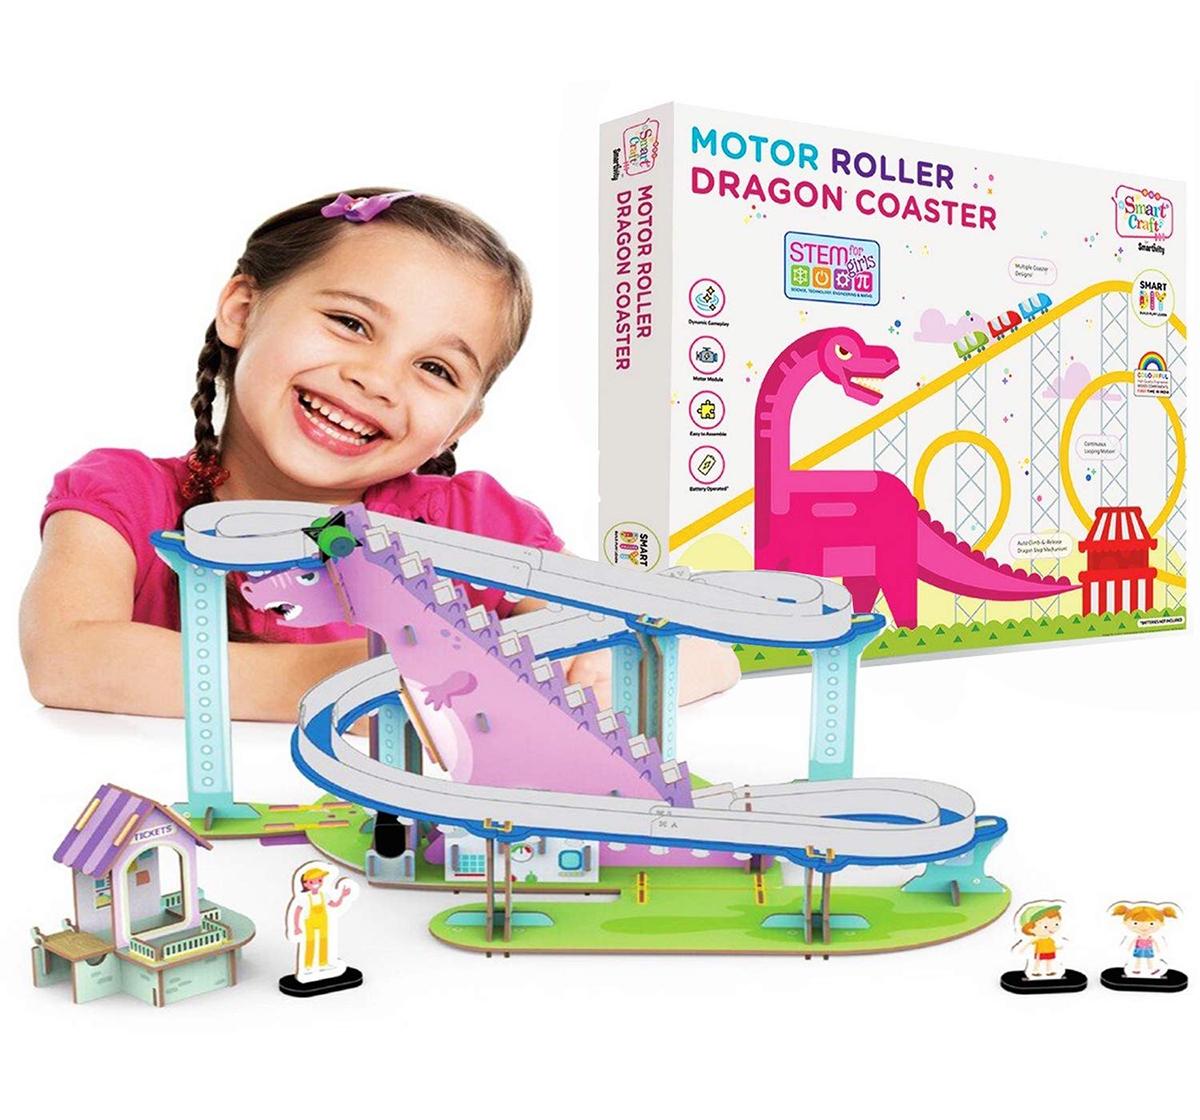 Smartivity | Smartivity Motor Roller Dragon Coaster: Stem, Diy, Educational, Learning, Building and Construction Toy for Kids age 6Y+  0